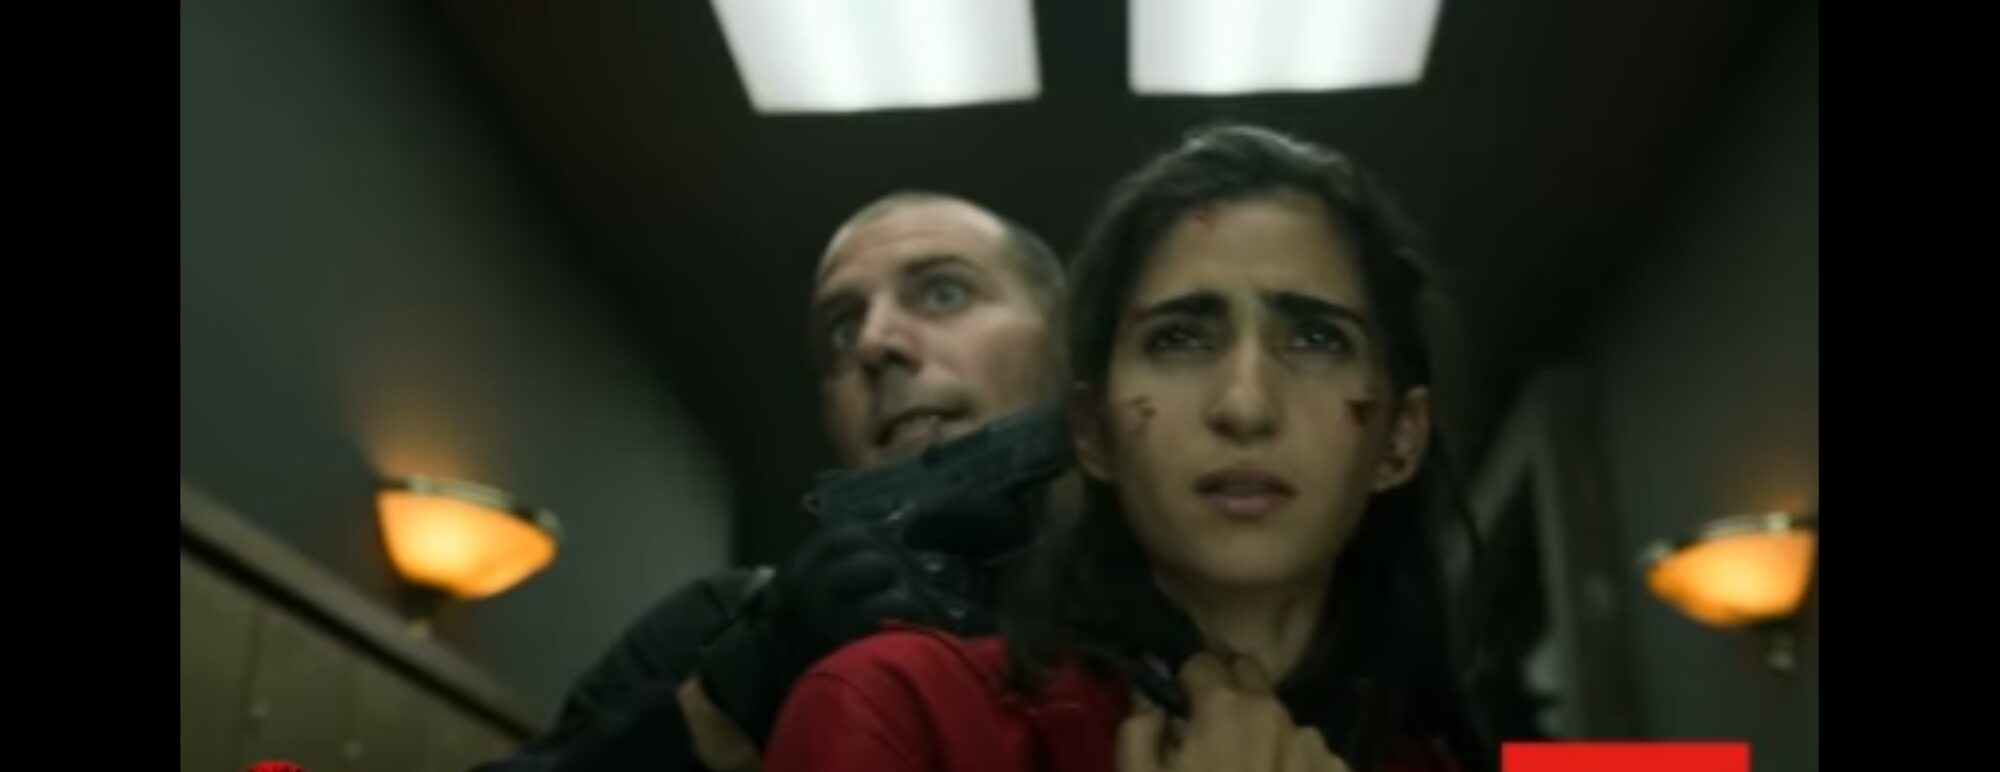 Money Heist Season 4 Episode 5 Explanation In English & Hindi Find Here An Exclusive Way Of Thriller.